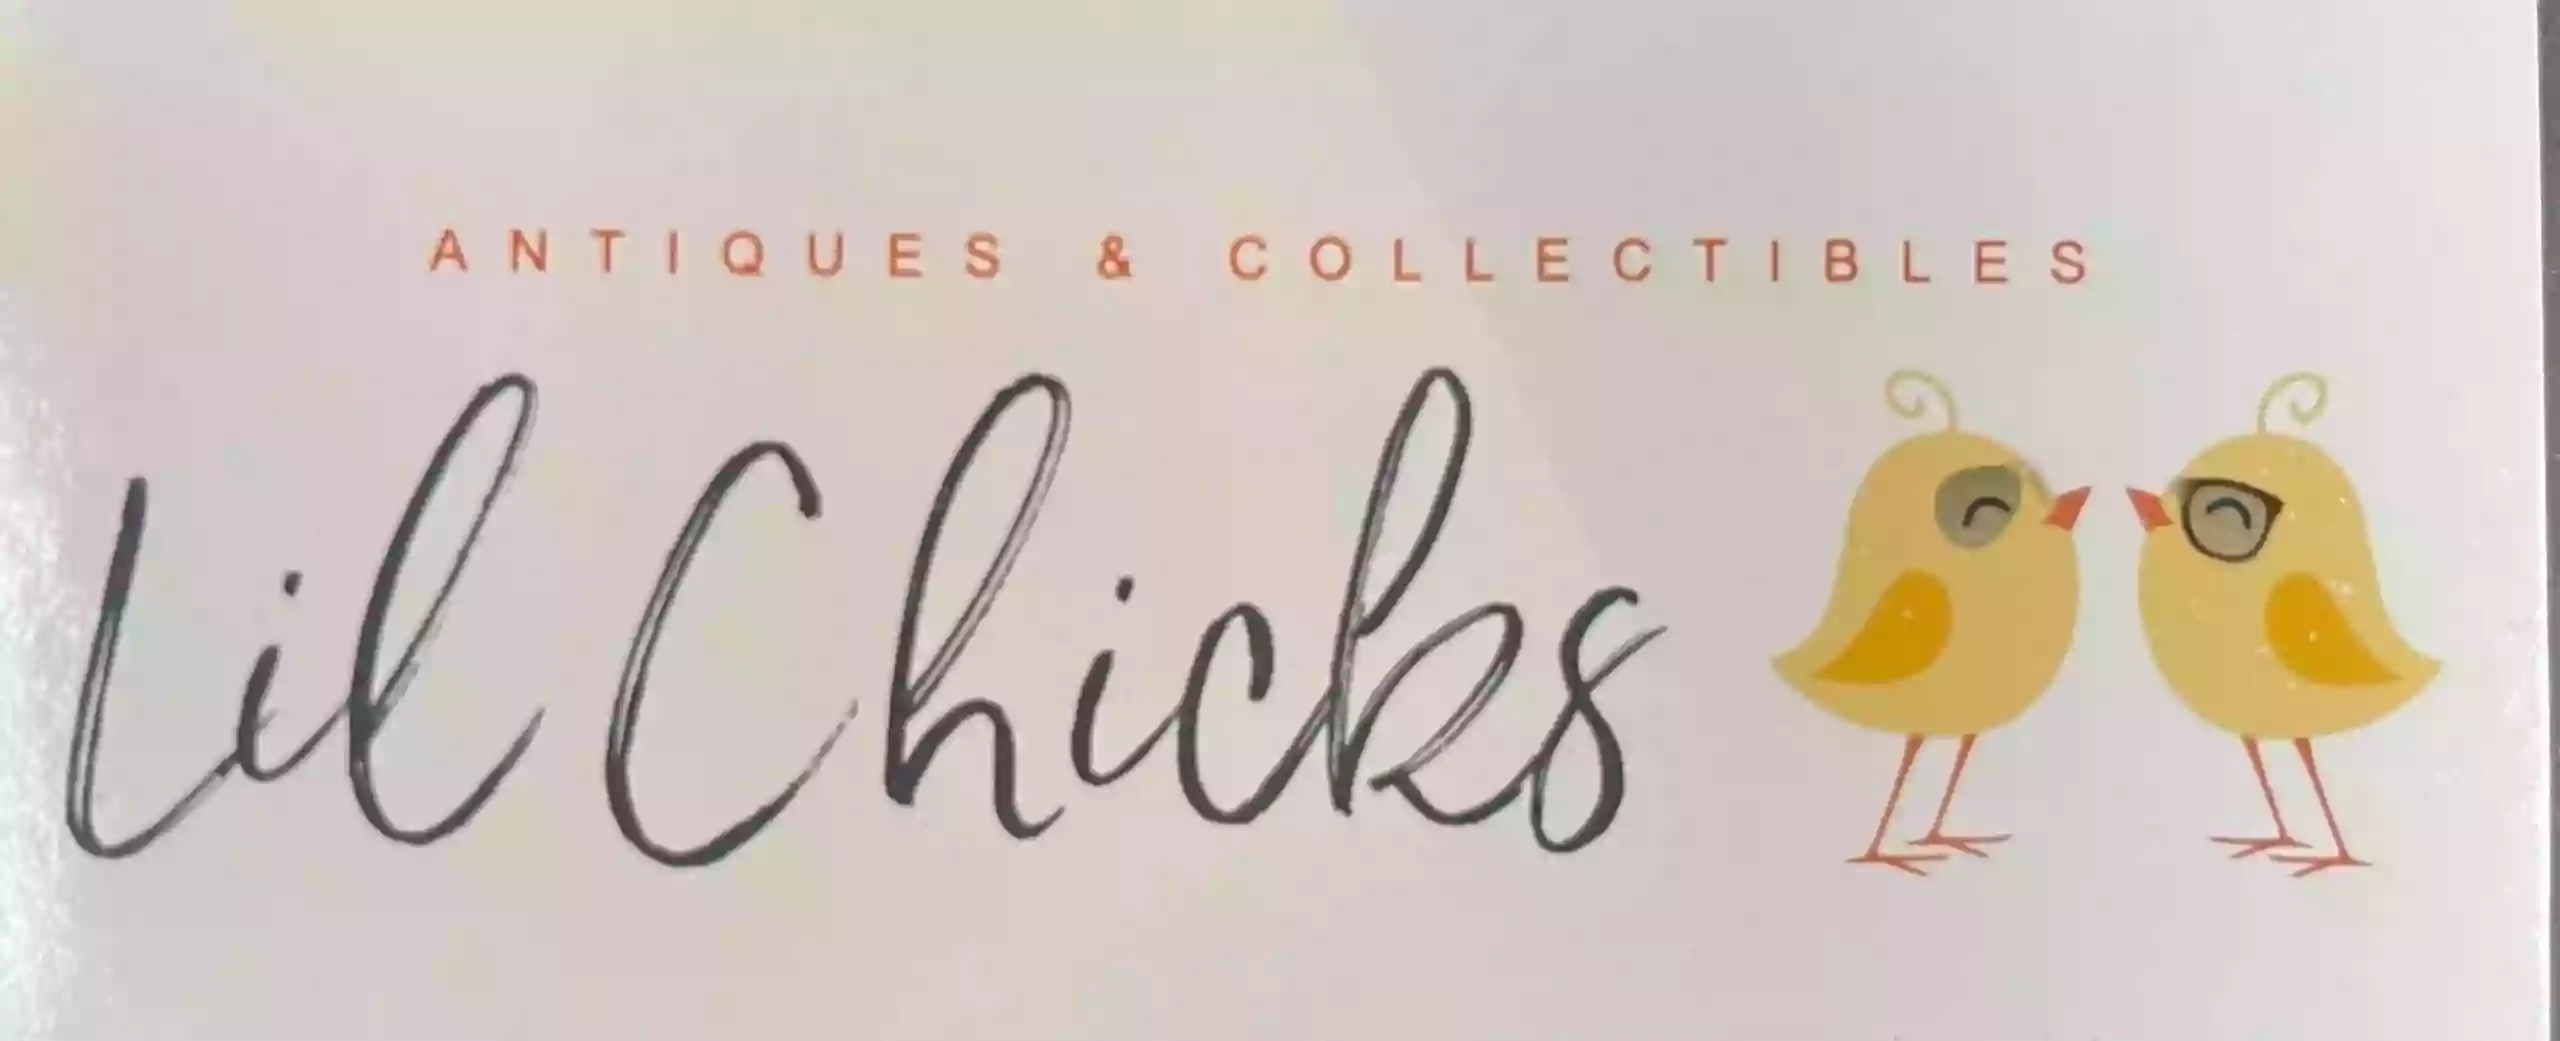 Lil Chicks Antiques and Collectibles